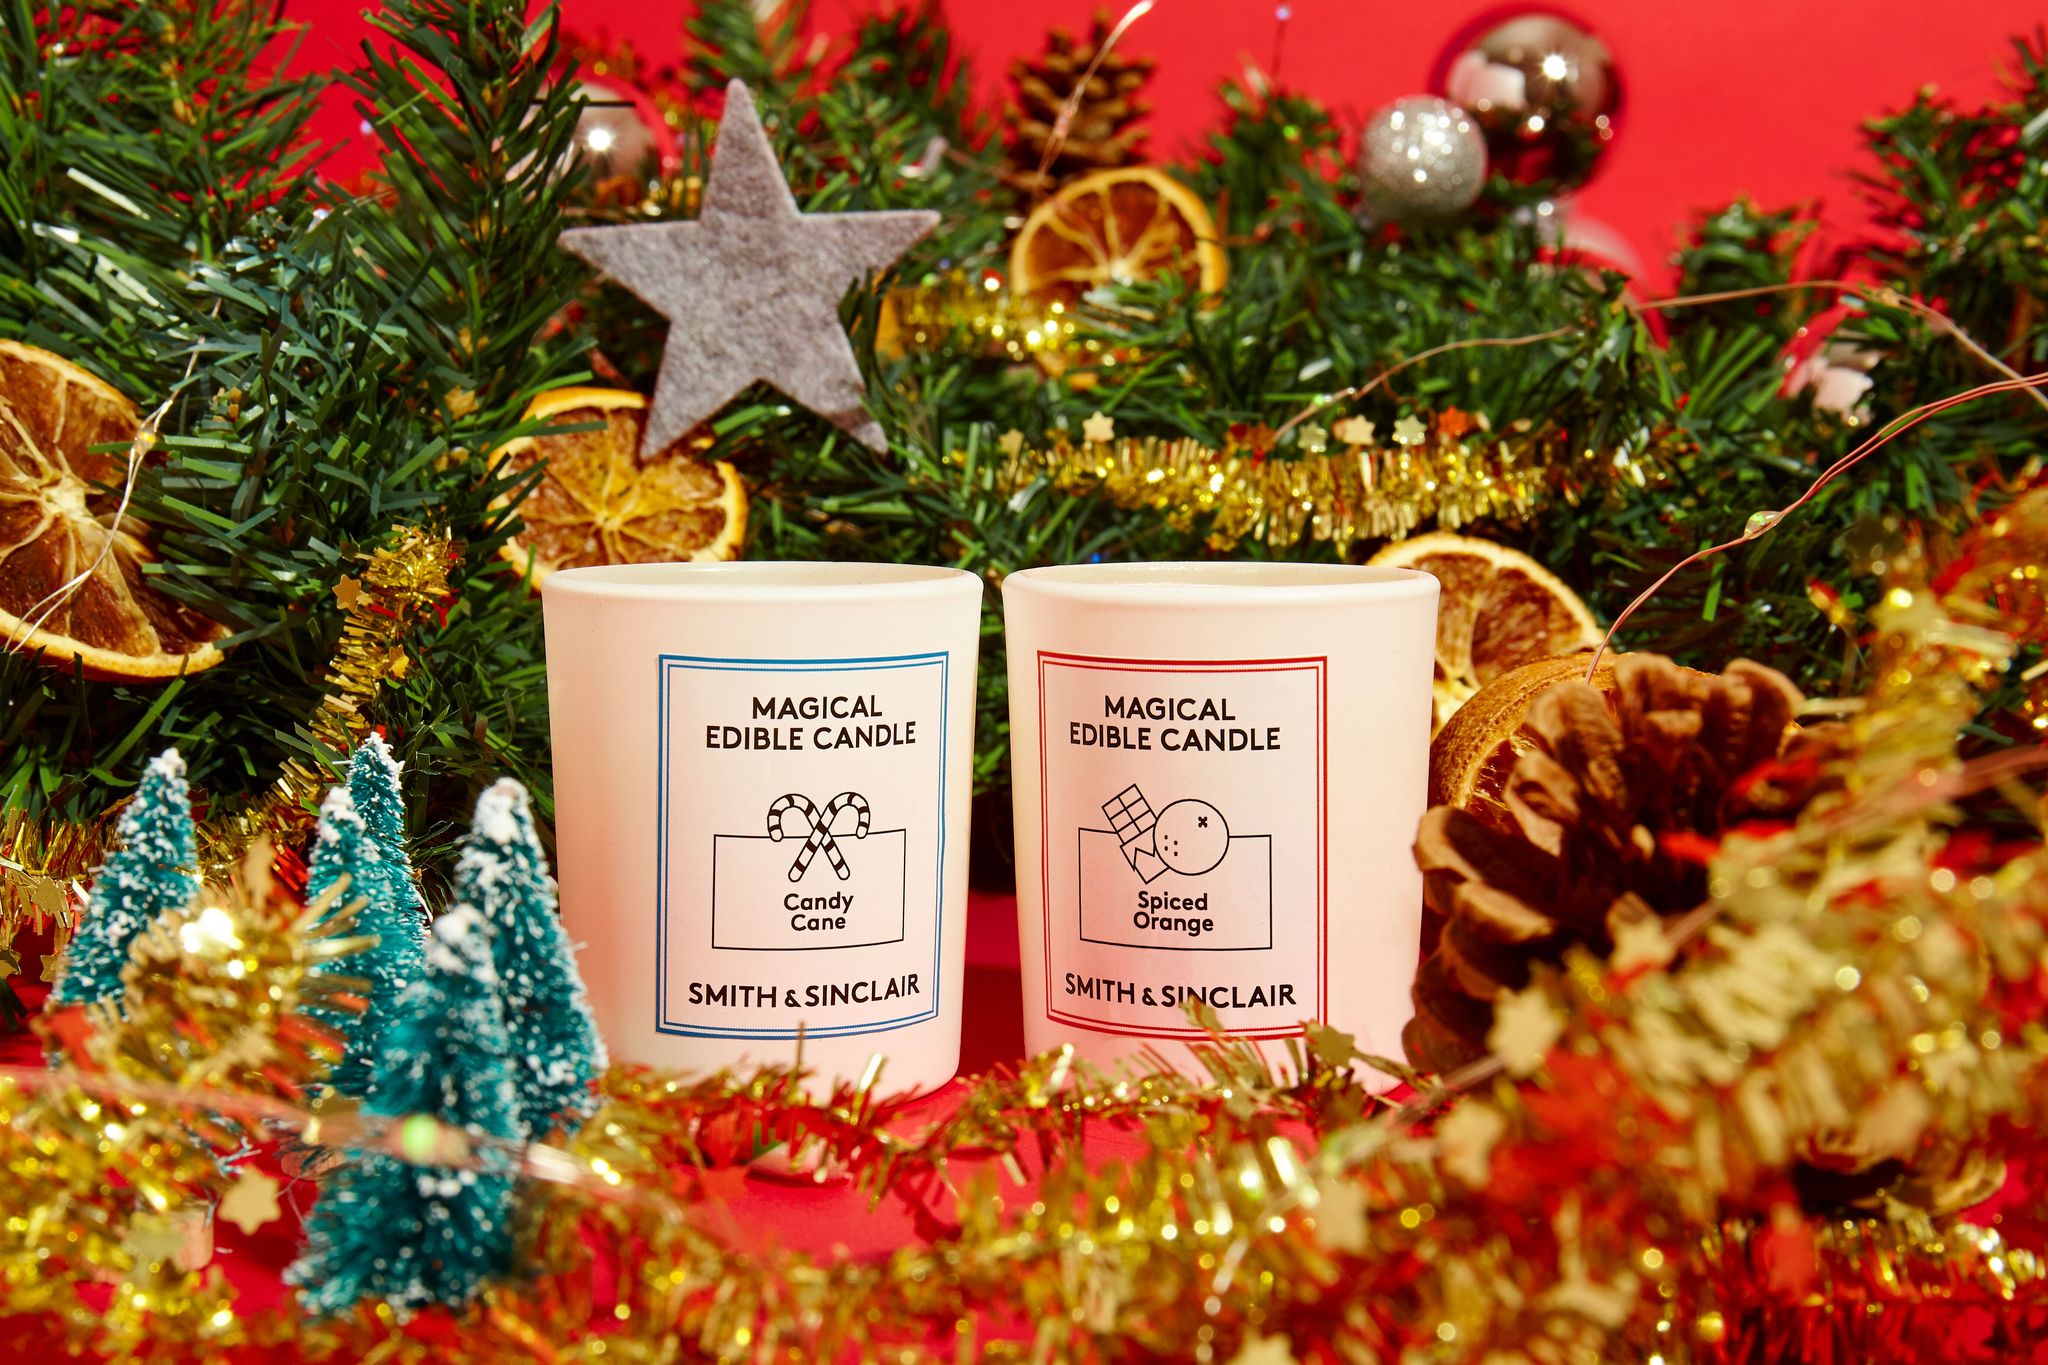 World's first edible candles are back for Christmas